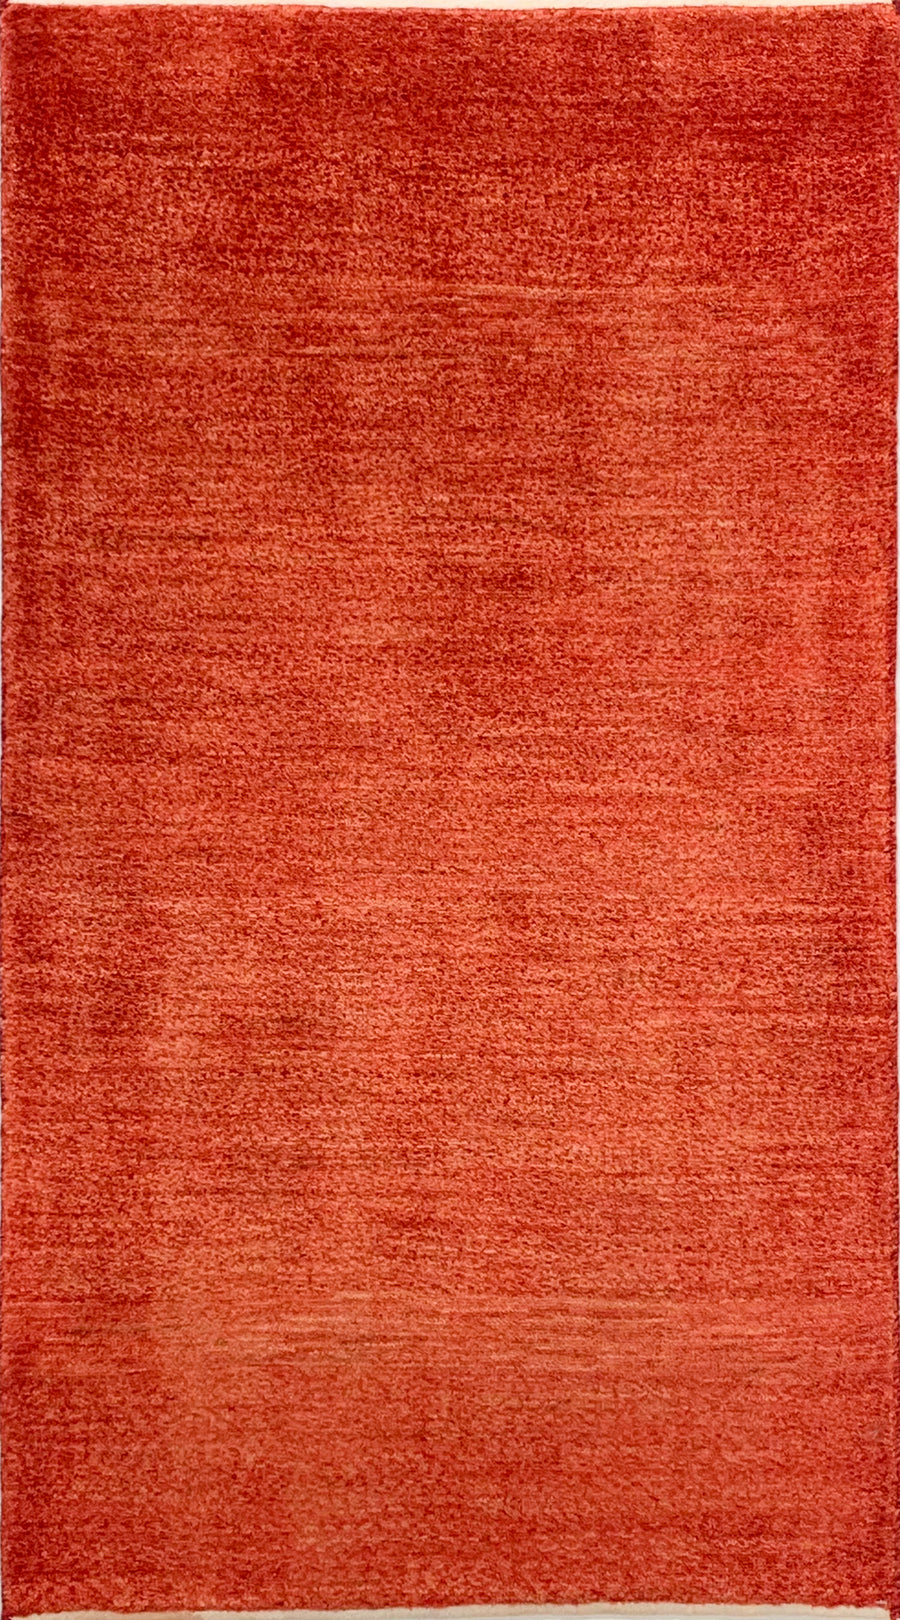 Handmade Traditional Red Gabbeh made with naturally sourced dyes in Southern Iran.